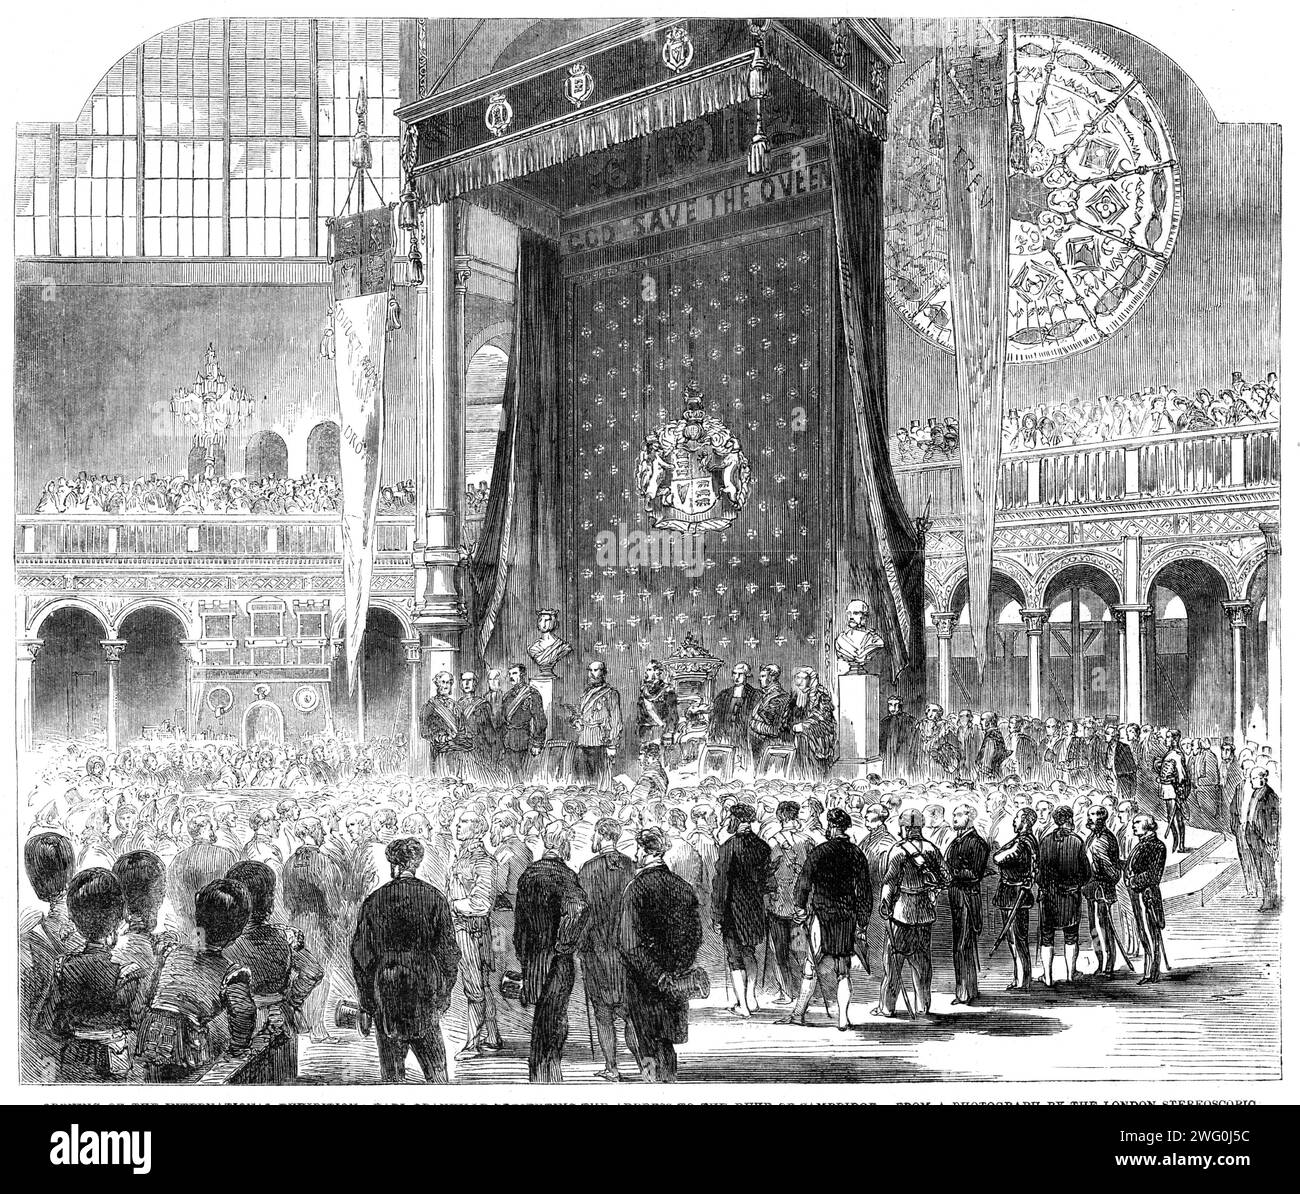 Opening of the International Exhibition: Earl Granville presenting the address to the Duke of Cambridge - from a photograph by the London Stereoscopic Company, 1862. '...a richly-ornamented throne had been erected, in front of which gilded chairs were placed for the Queen's commissioners. In the central place is the Duke of Cambridge; on his right, the Crown Prince of Prussia, the Archbishop of Canterbury, and the Earl of Derby; on his left are Prince Oscar of Sweden, the Lord Chamberlain, Viscount Palmerston, and the Speaker of the House of Commons...at the foot of the dais...stood the Royal Stock Photo